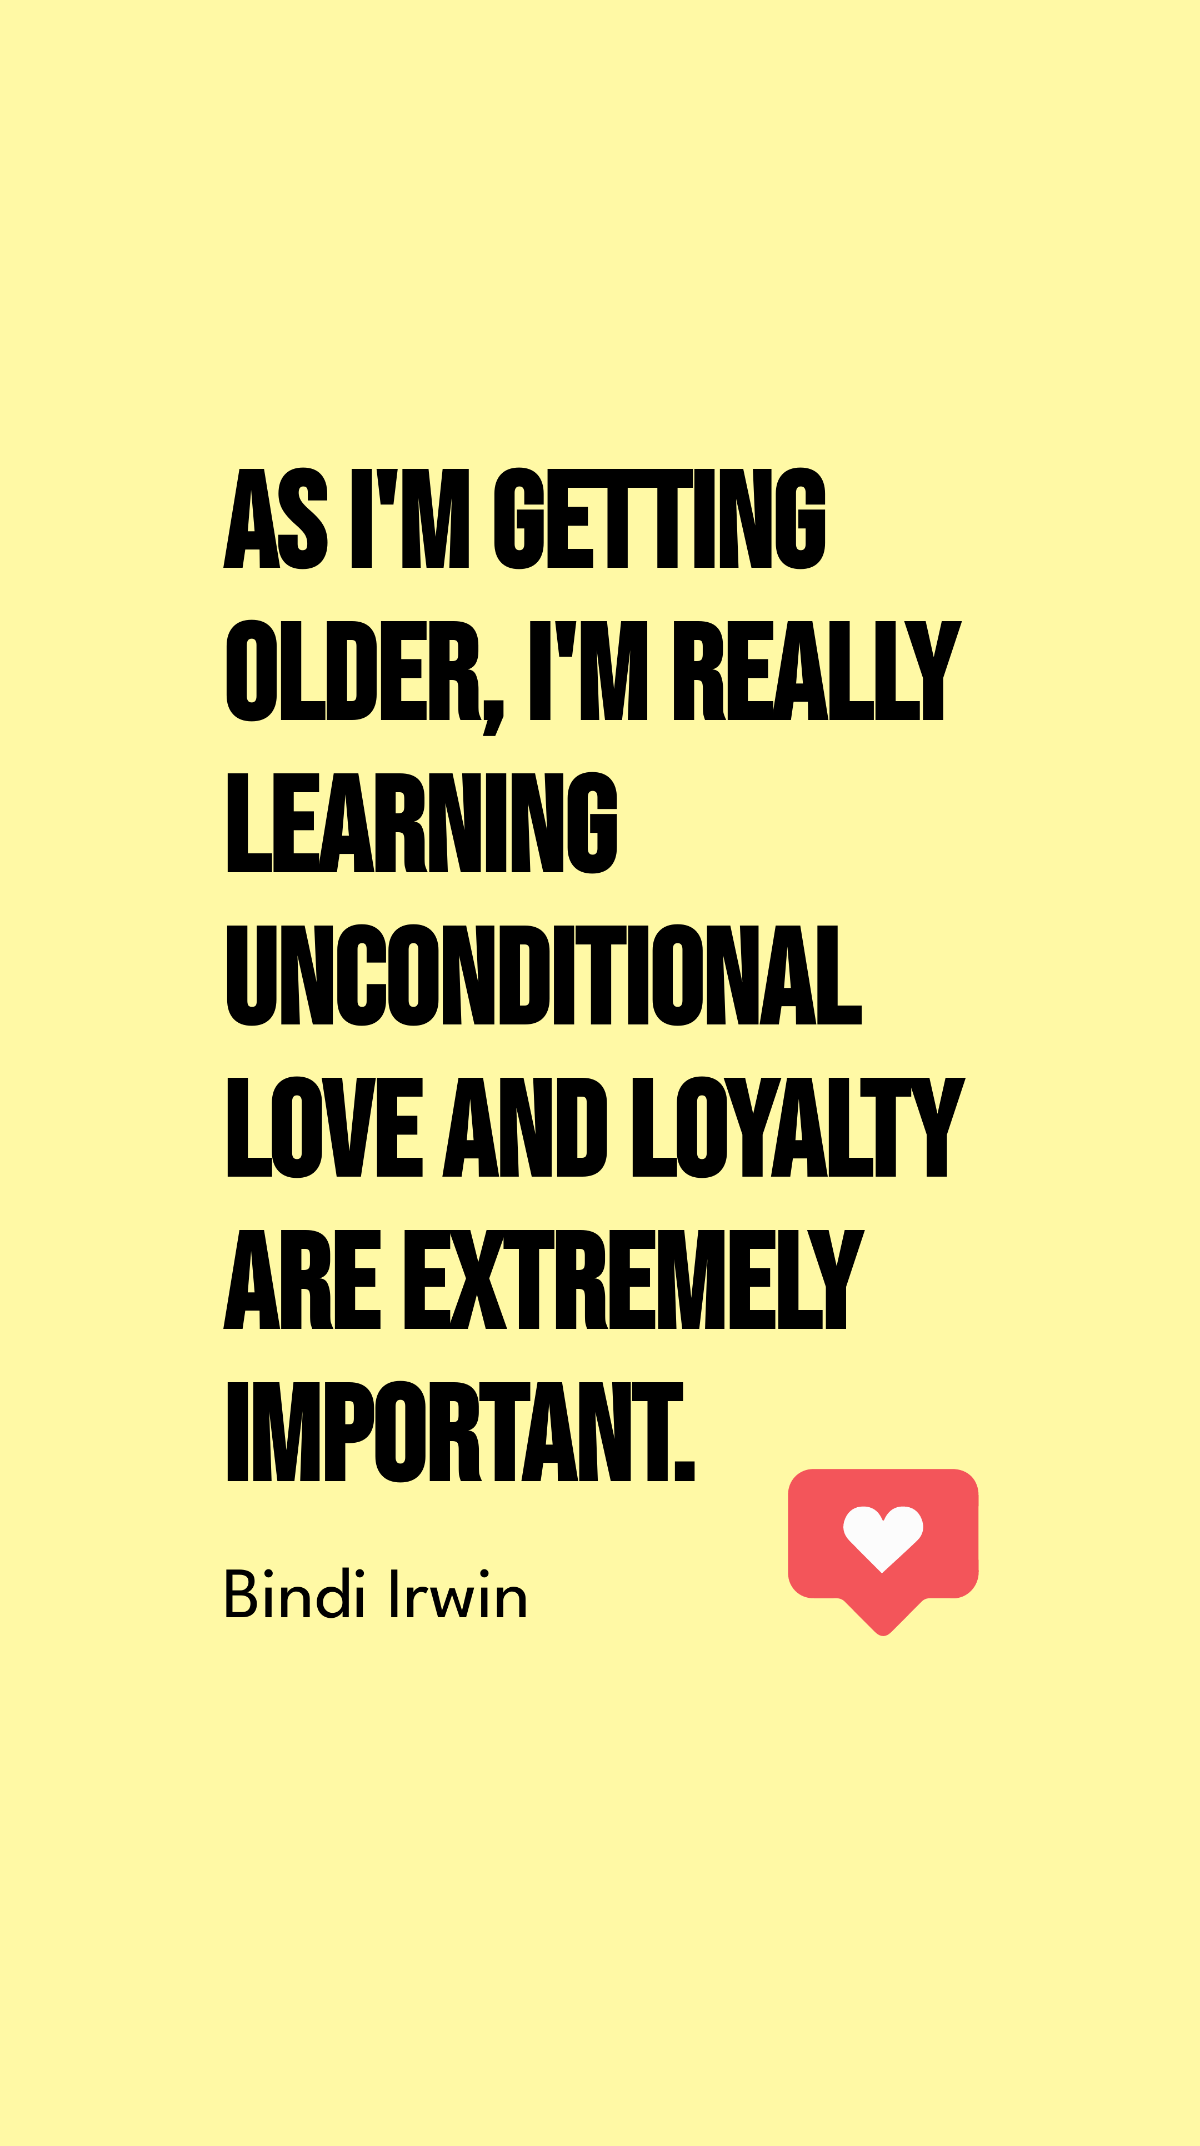 Free Bindi Irwin- As I'm getting older, I'm really learning unconditional love and loyalty are extremely important. Template